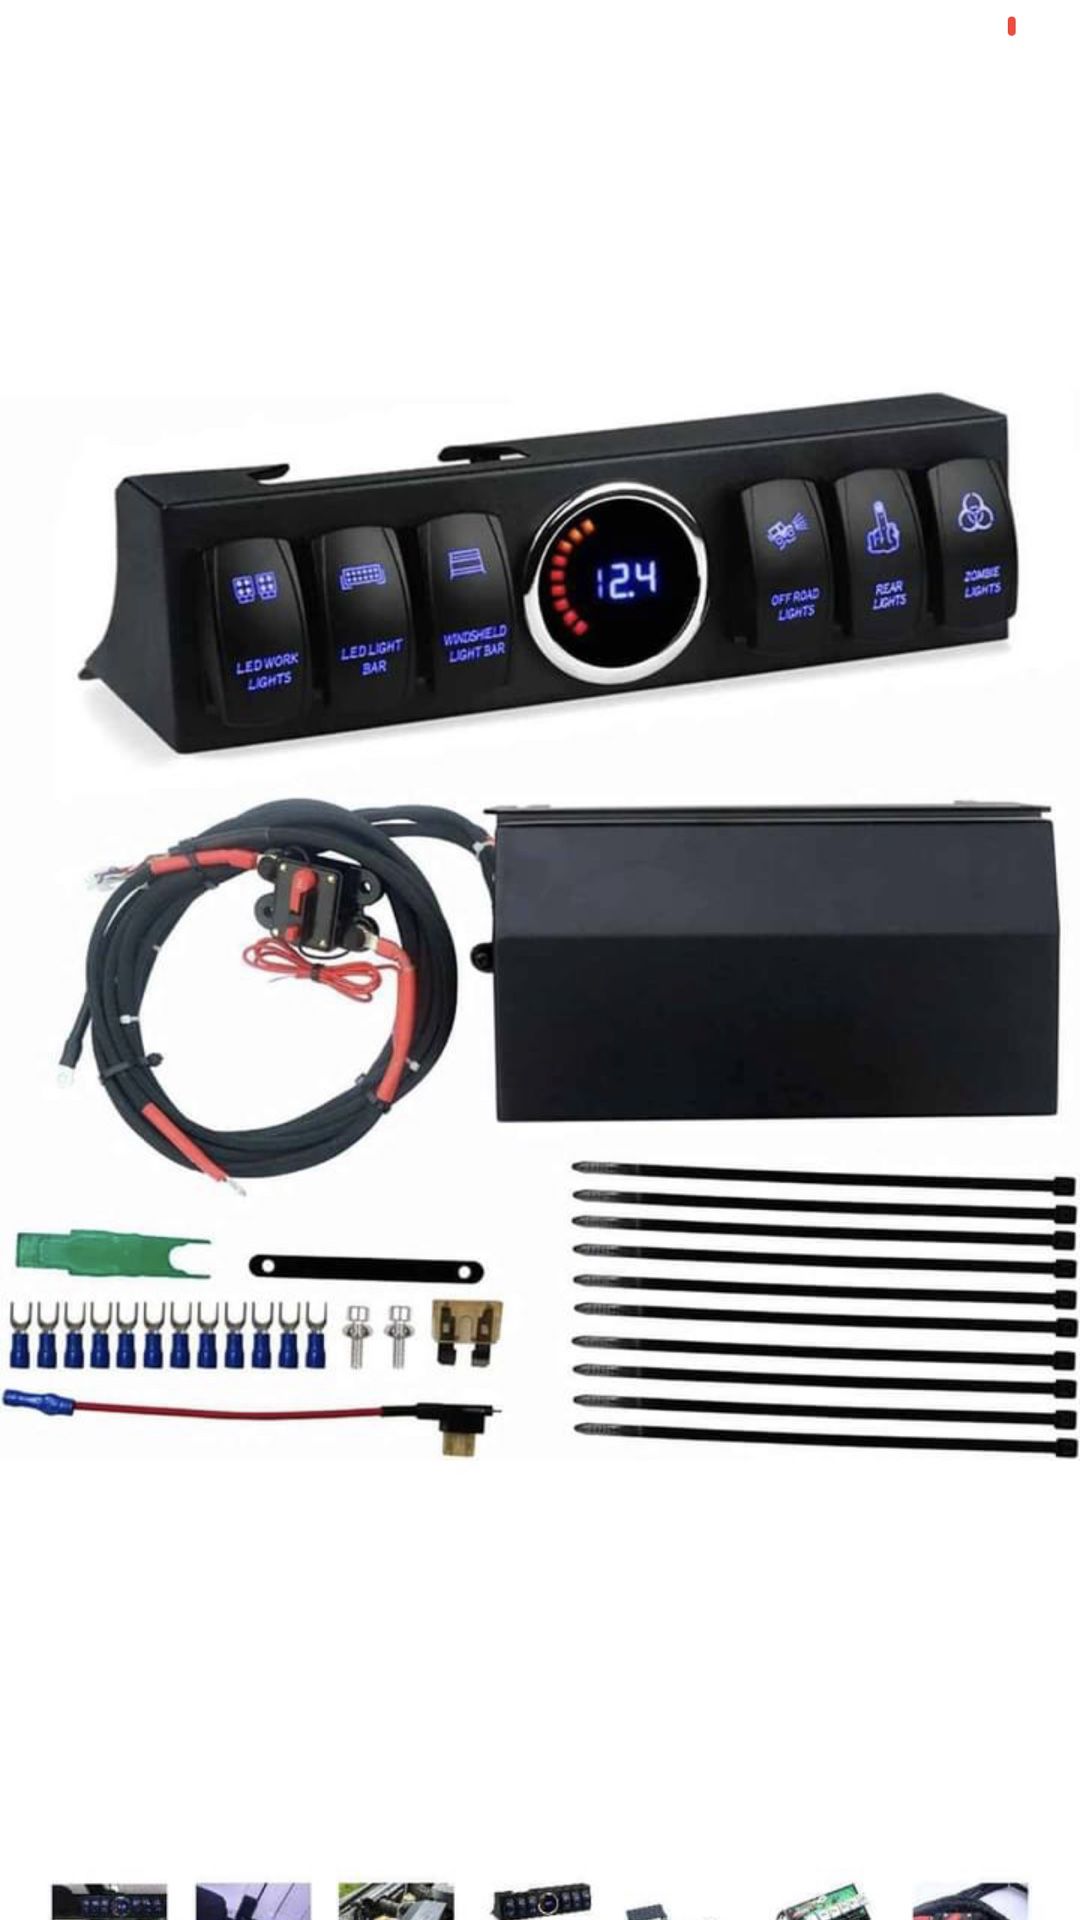 Multifunction 6 Gang Rock Switch Panel Control System for Jeep Wrangler JK & JKU 2007-2018 with Rela